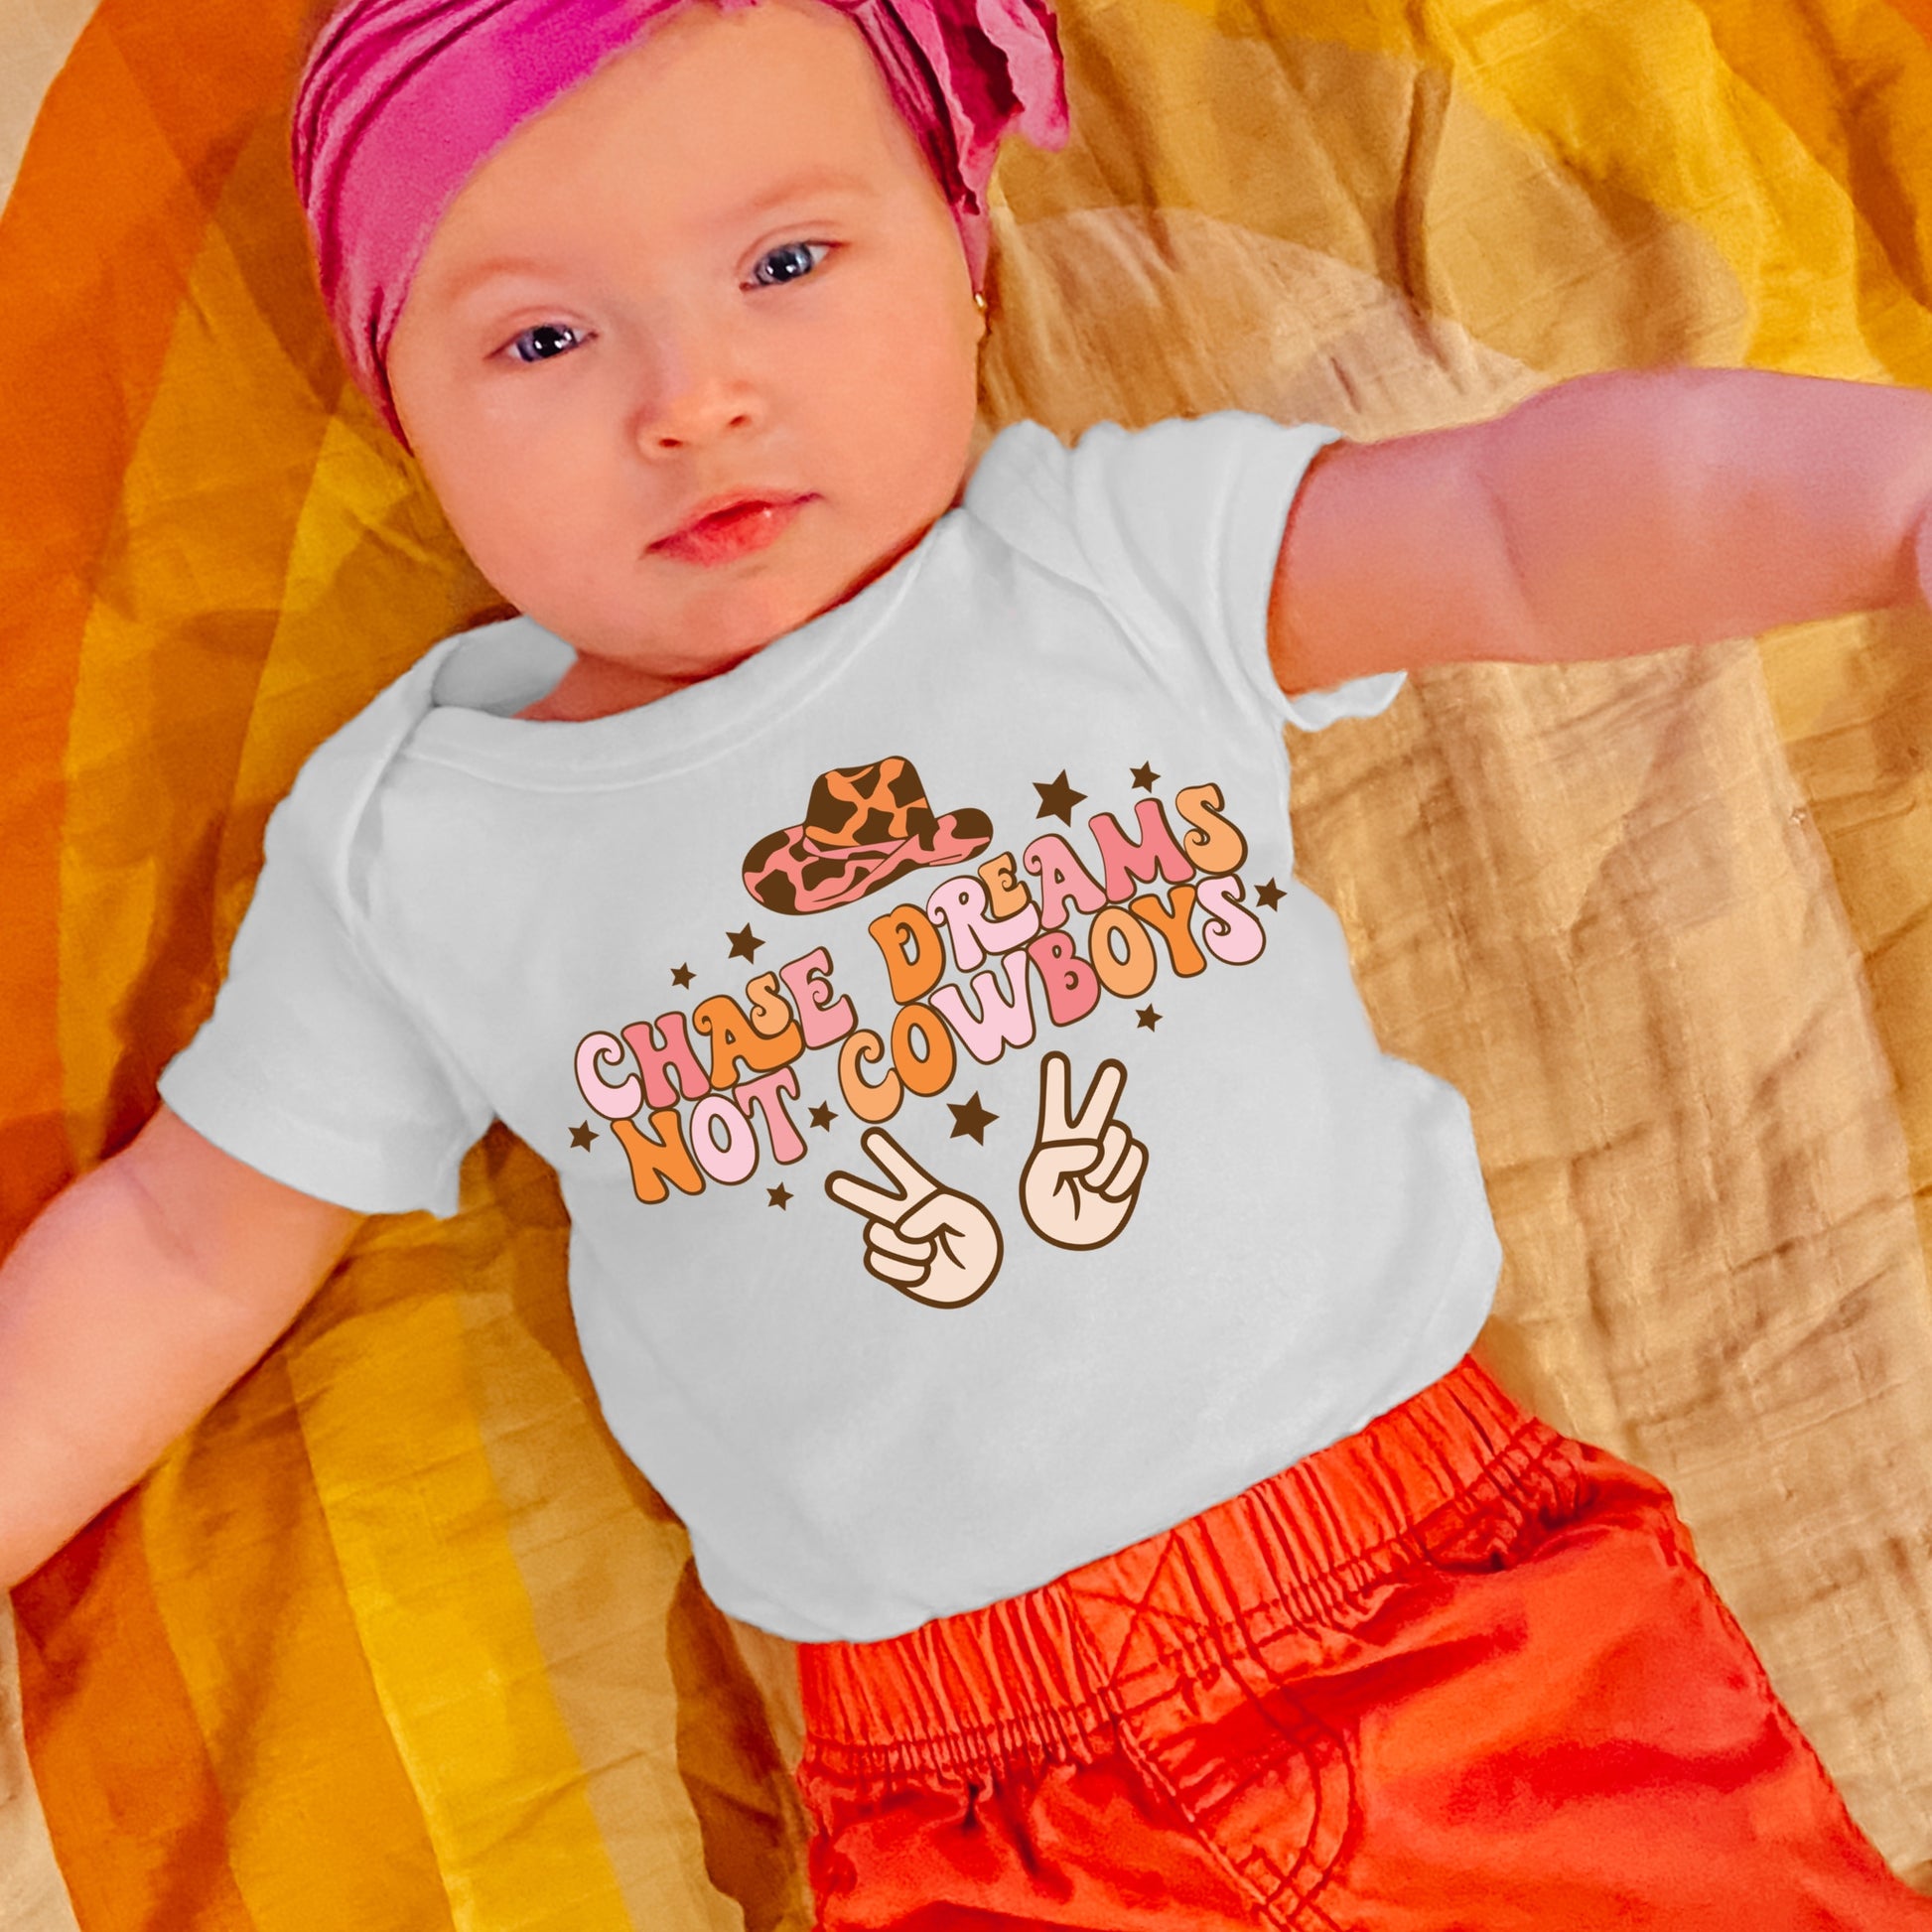 Pink and Orange "Chase Dreams, Not Cowboys" Iron on heat transfer with a cow print cowgirl hat and brown stars.